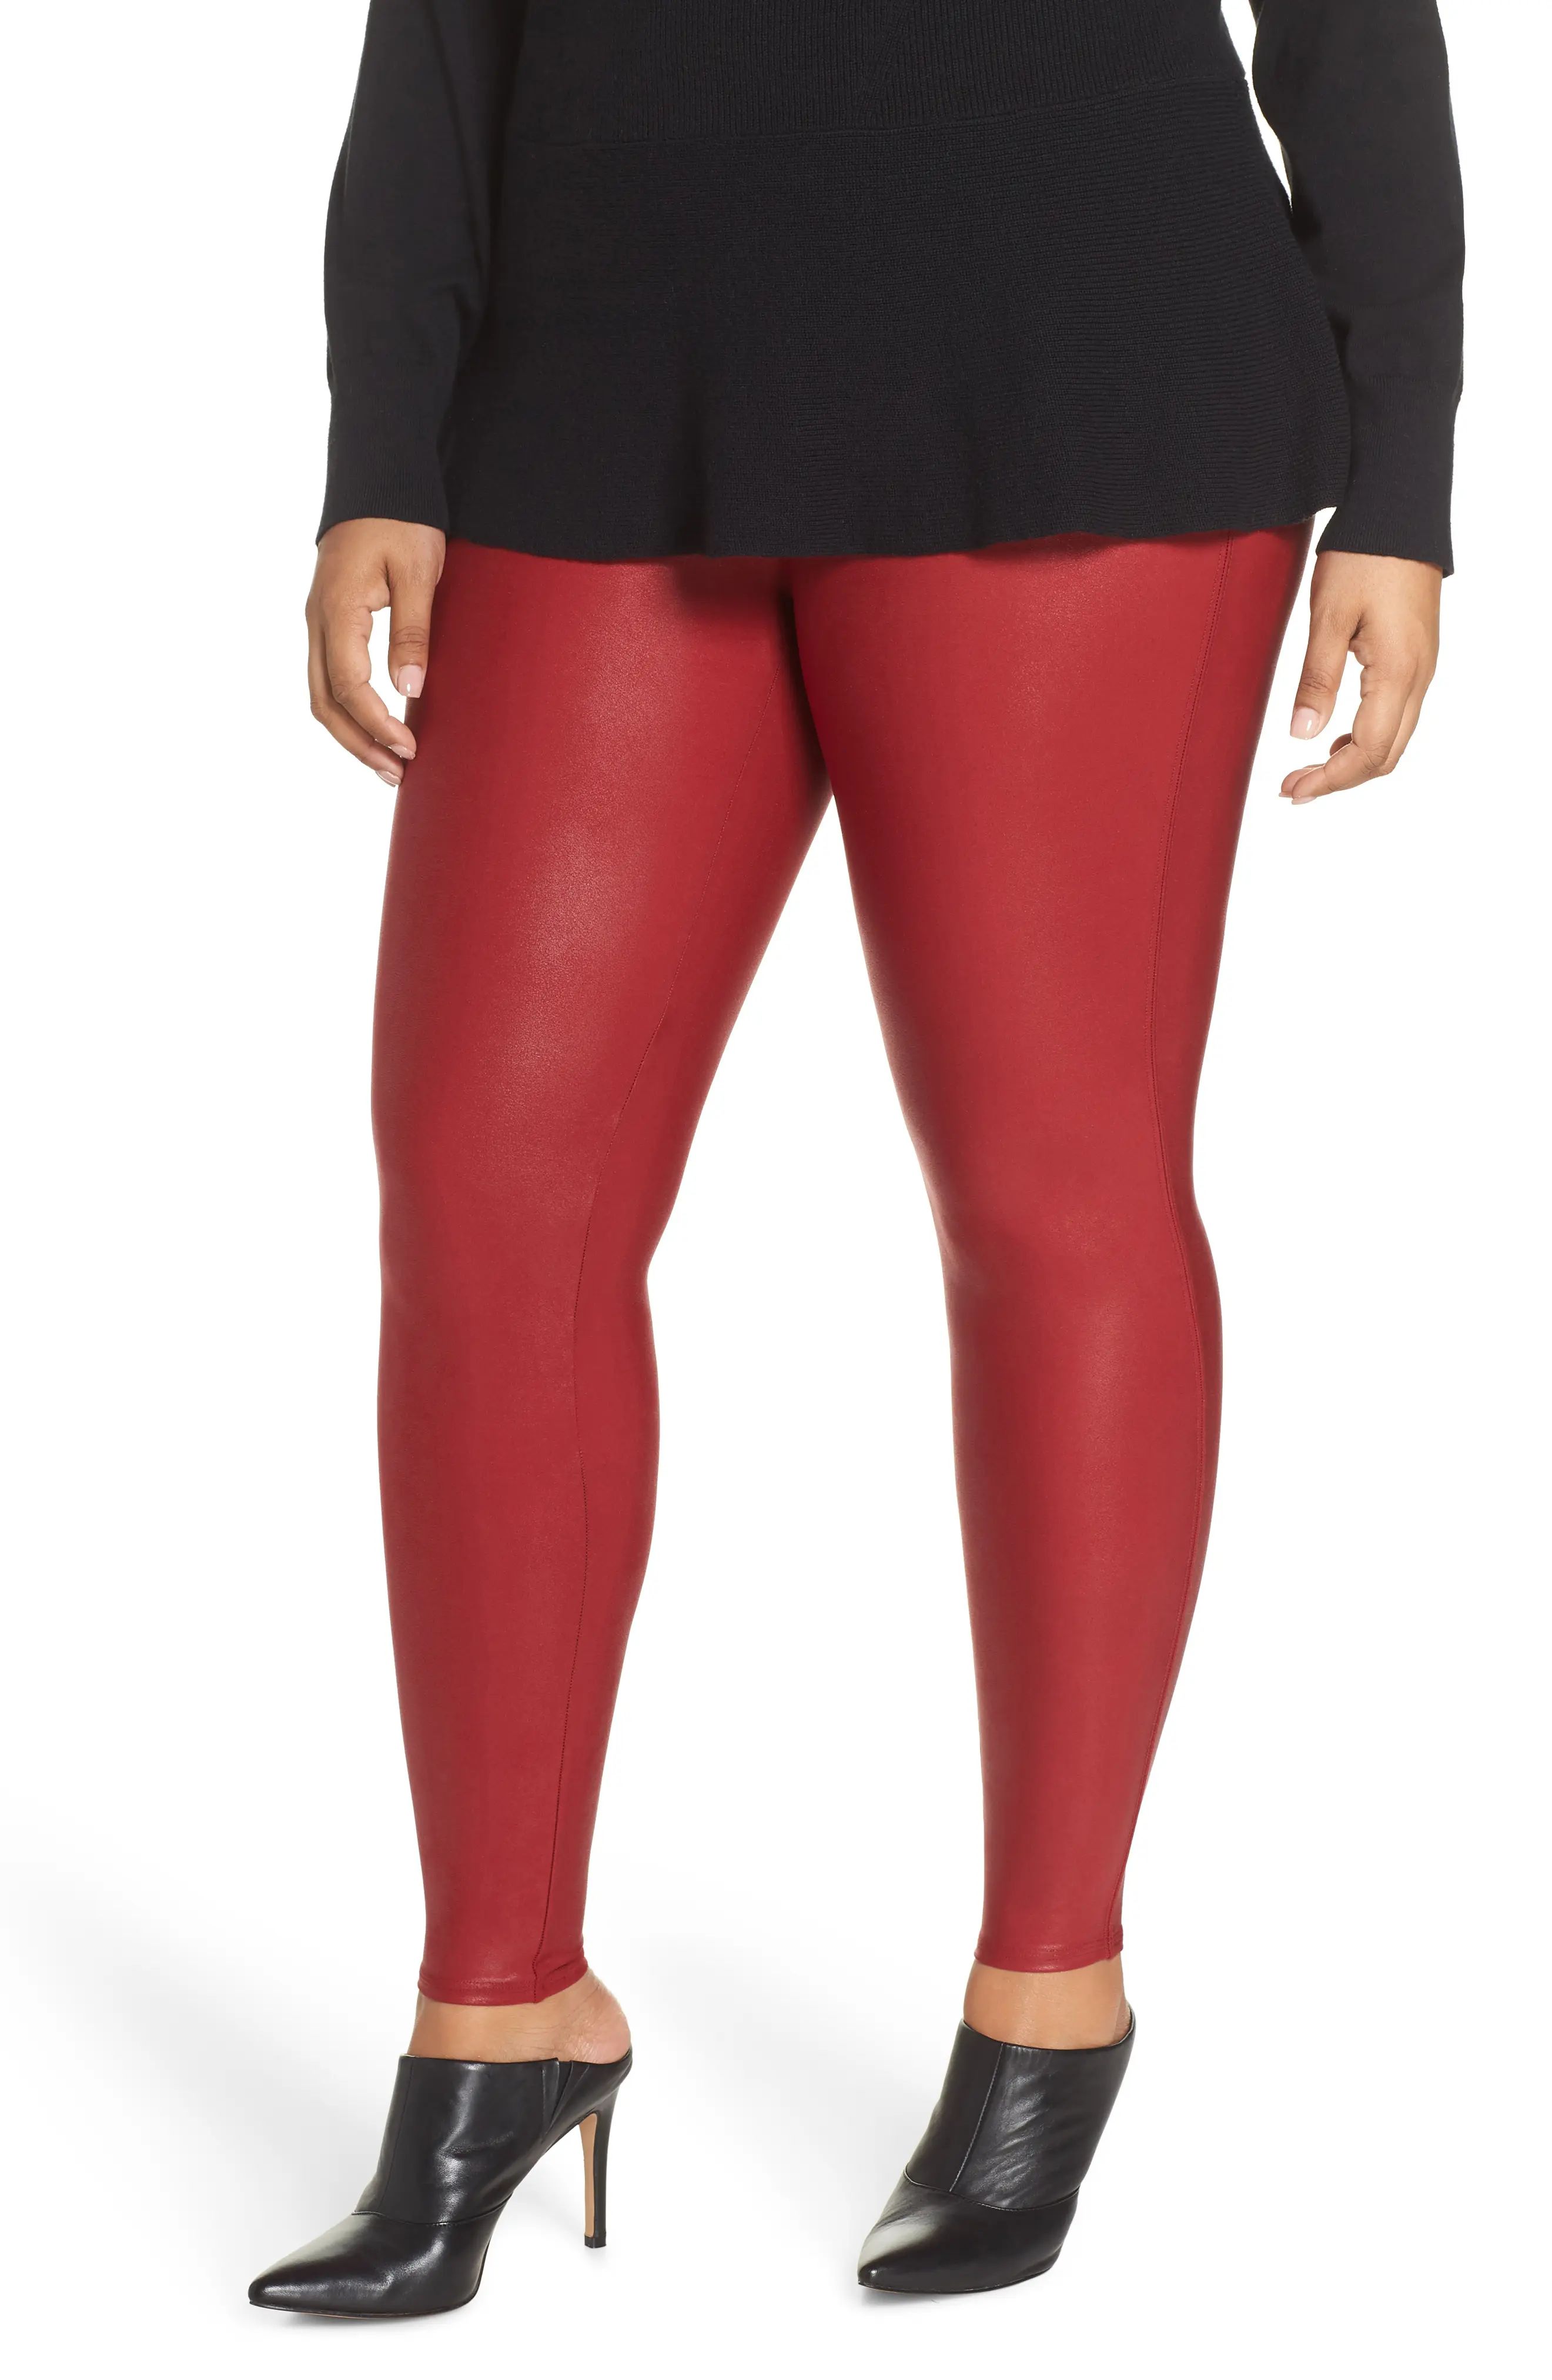 SPANX® Faux Leather Leggings (Plus Size) | Nordstrom